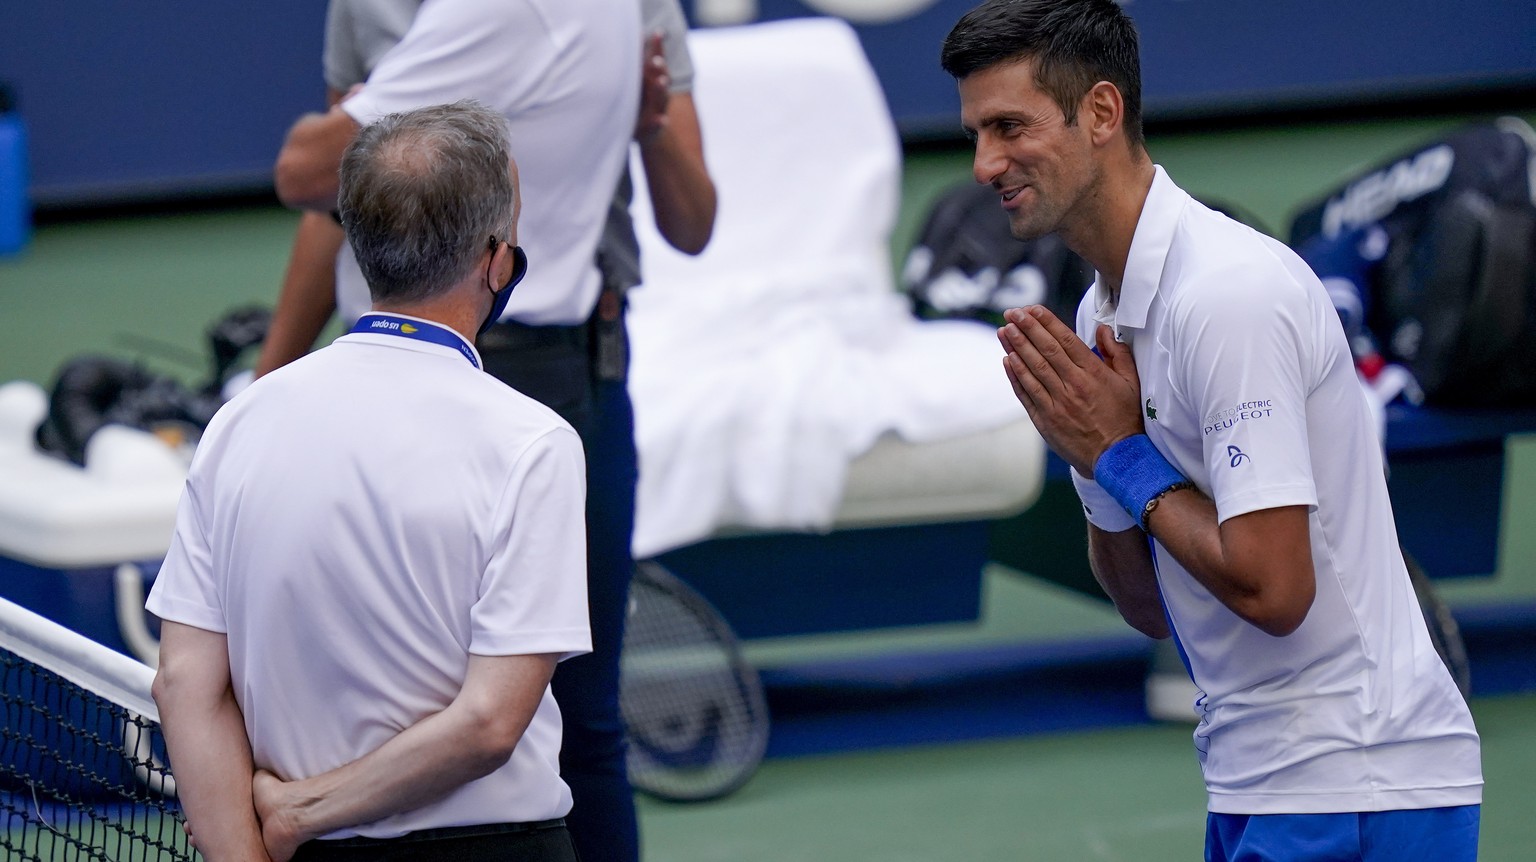 Novak Djokovic, of Serbia, talks with the umpire after inadvertently hitting a line judge with a ball after hitting it in reaction to losing a point against Pablo Carreno Busta, of Spain, during the f ...